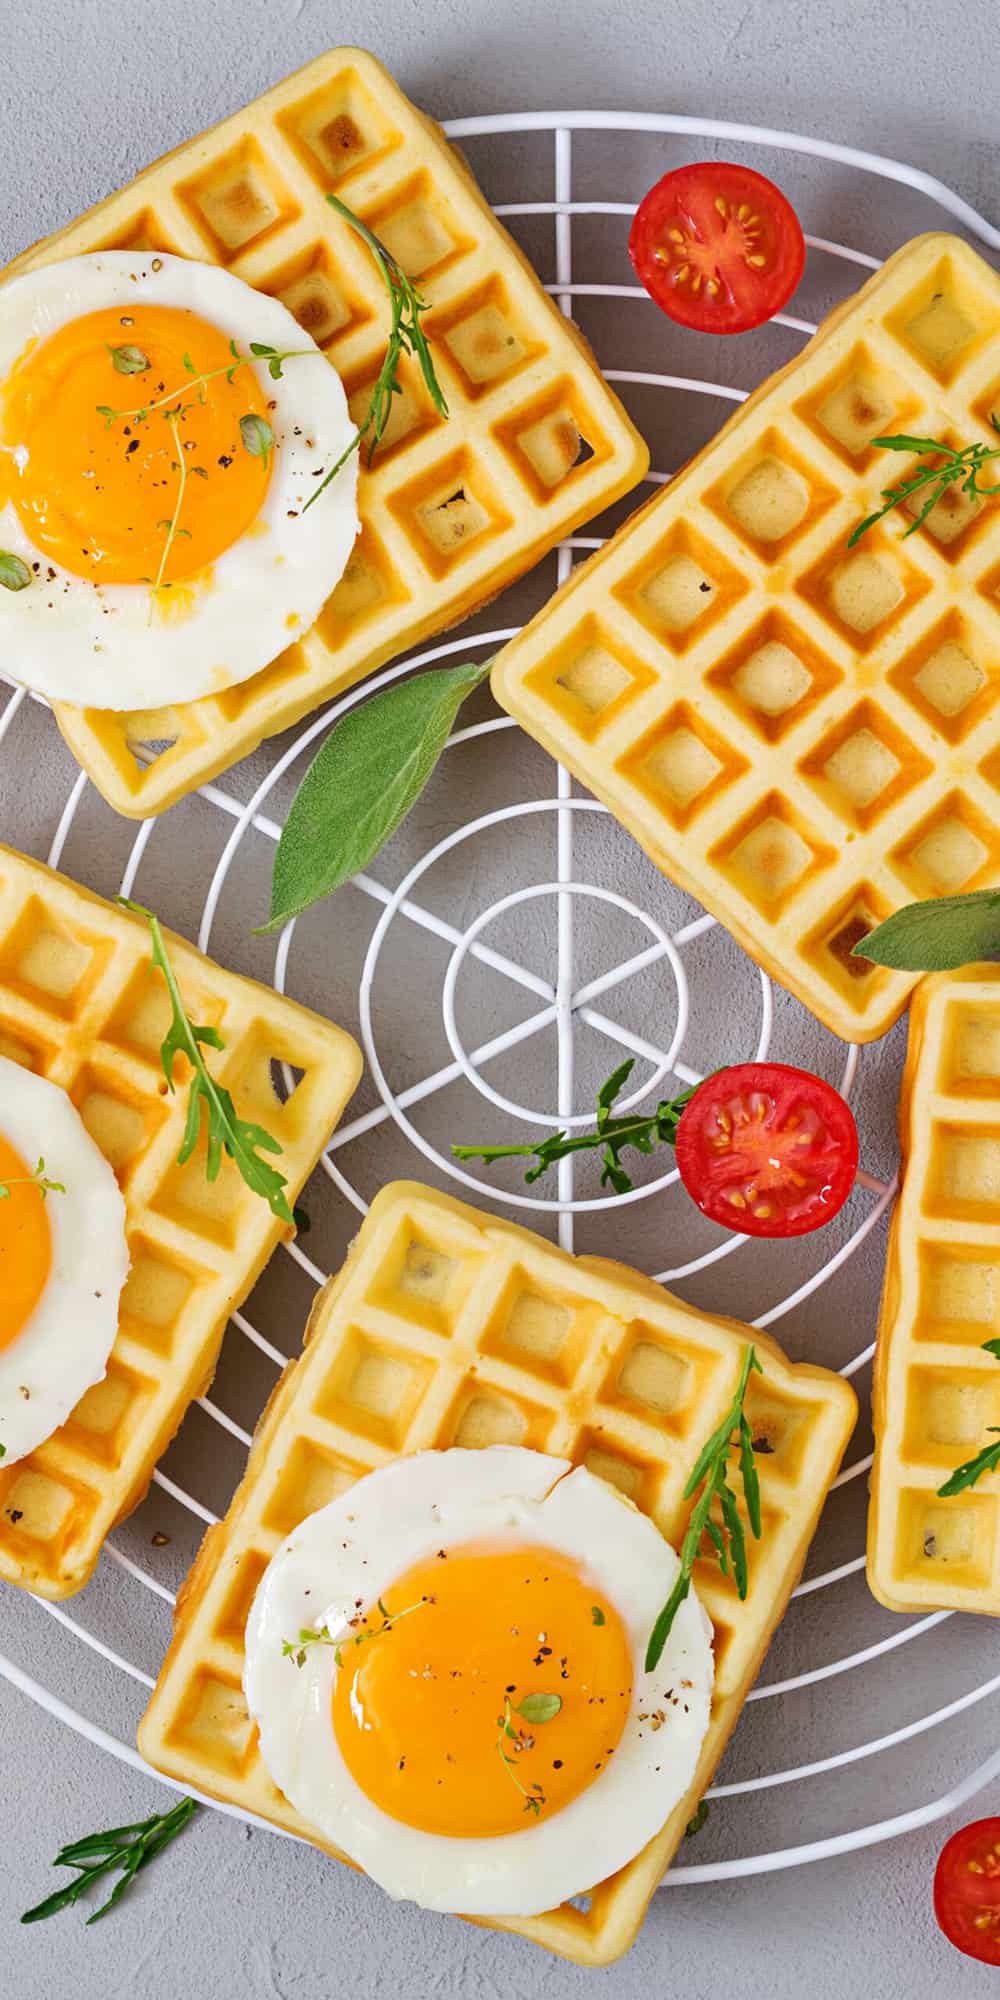 gluten-free waffles served with healthy breakfast sides such as fresh herbs and eggs